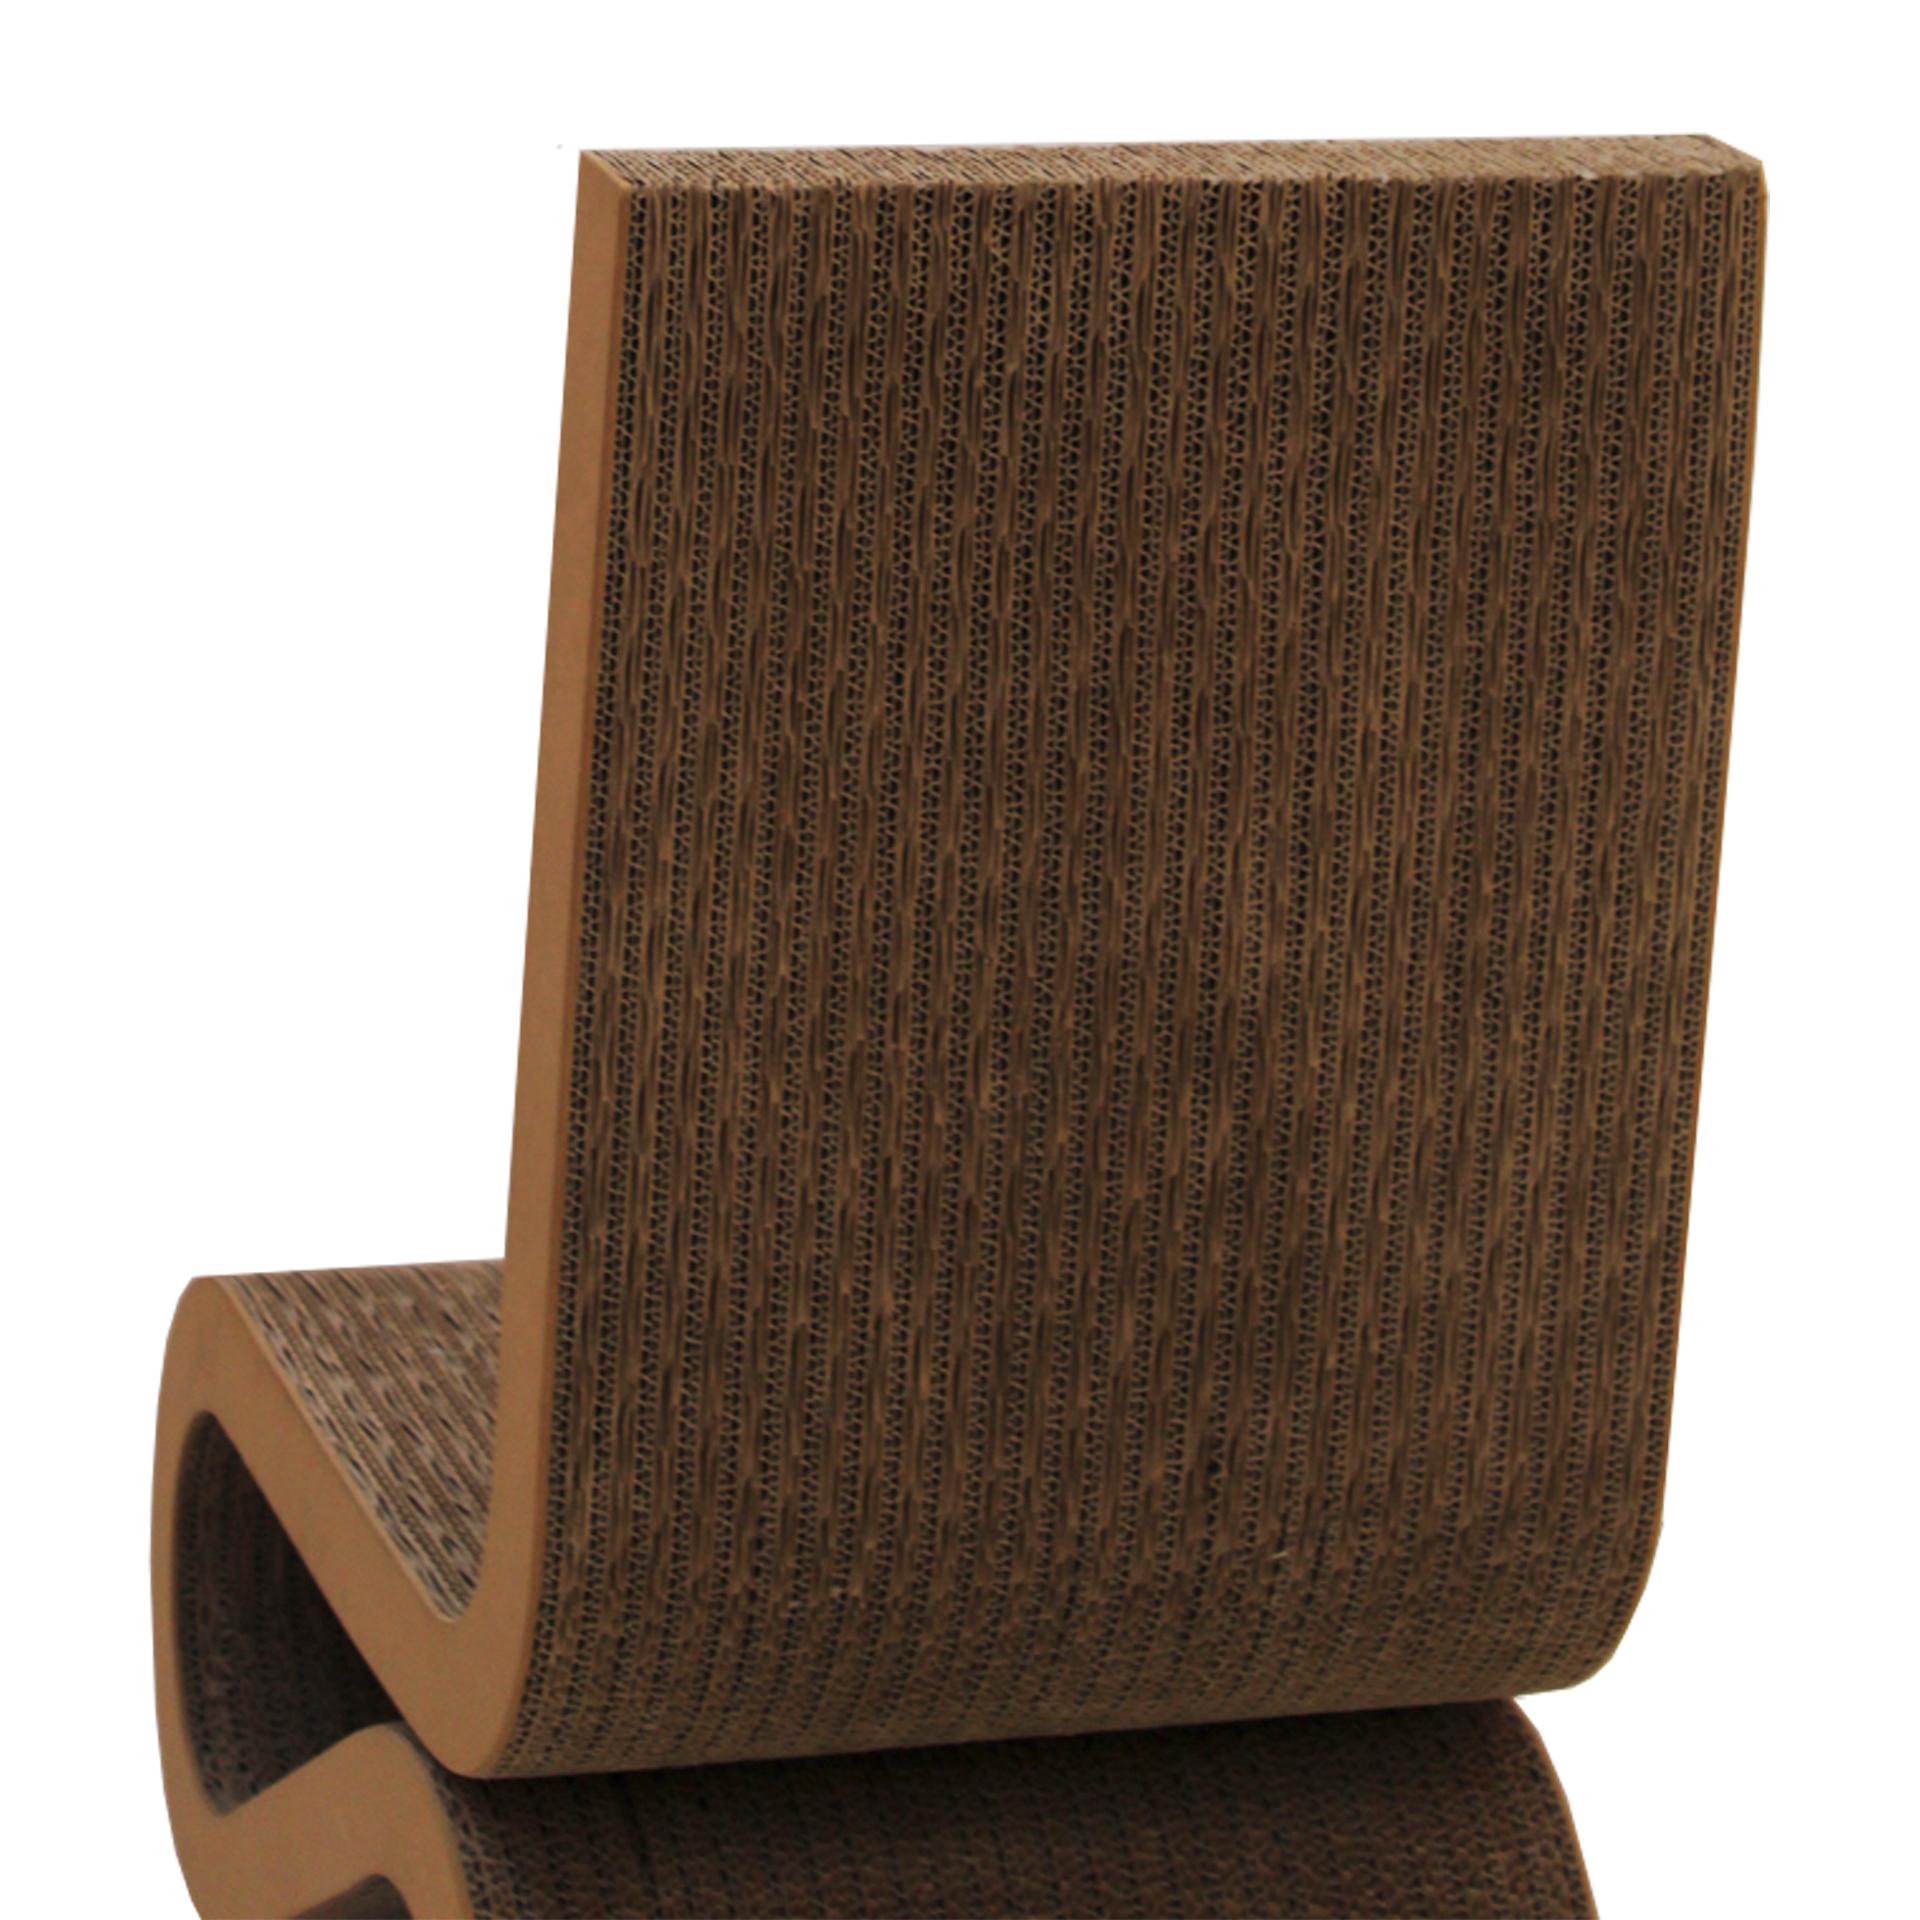 American Wiggle Side Chair Designed by Frank Gehry made in Organic shaped Cardboard 